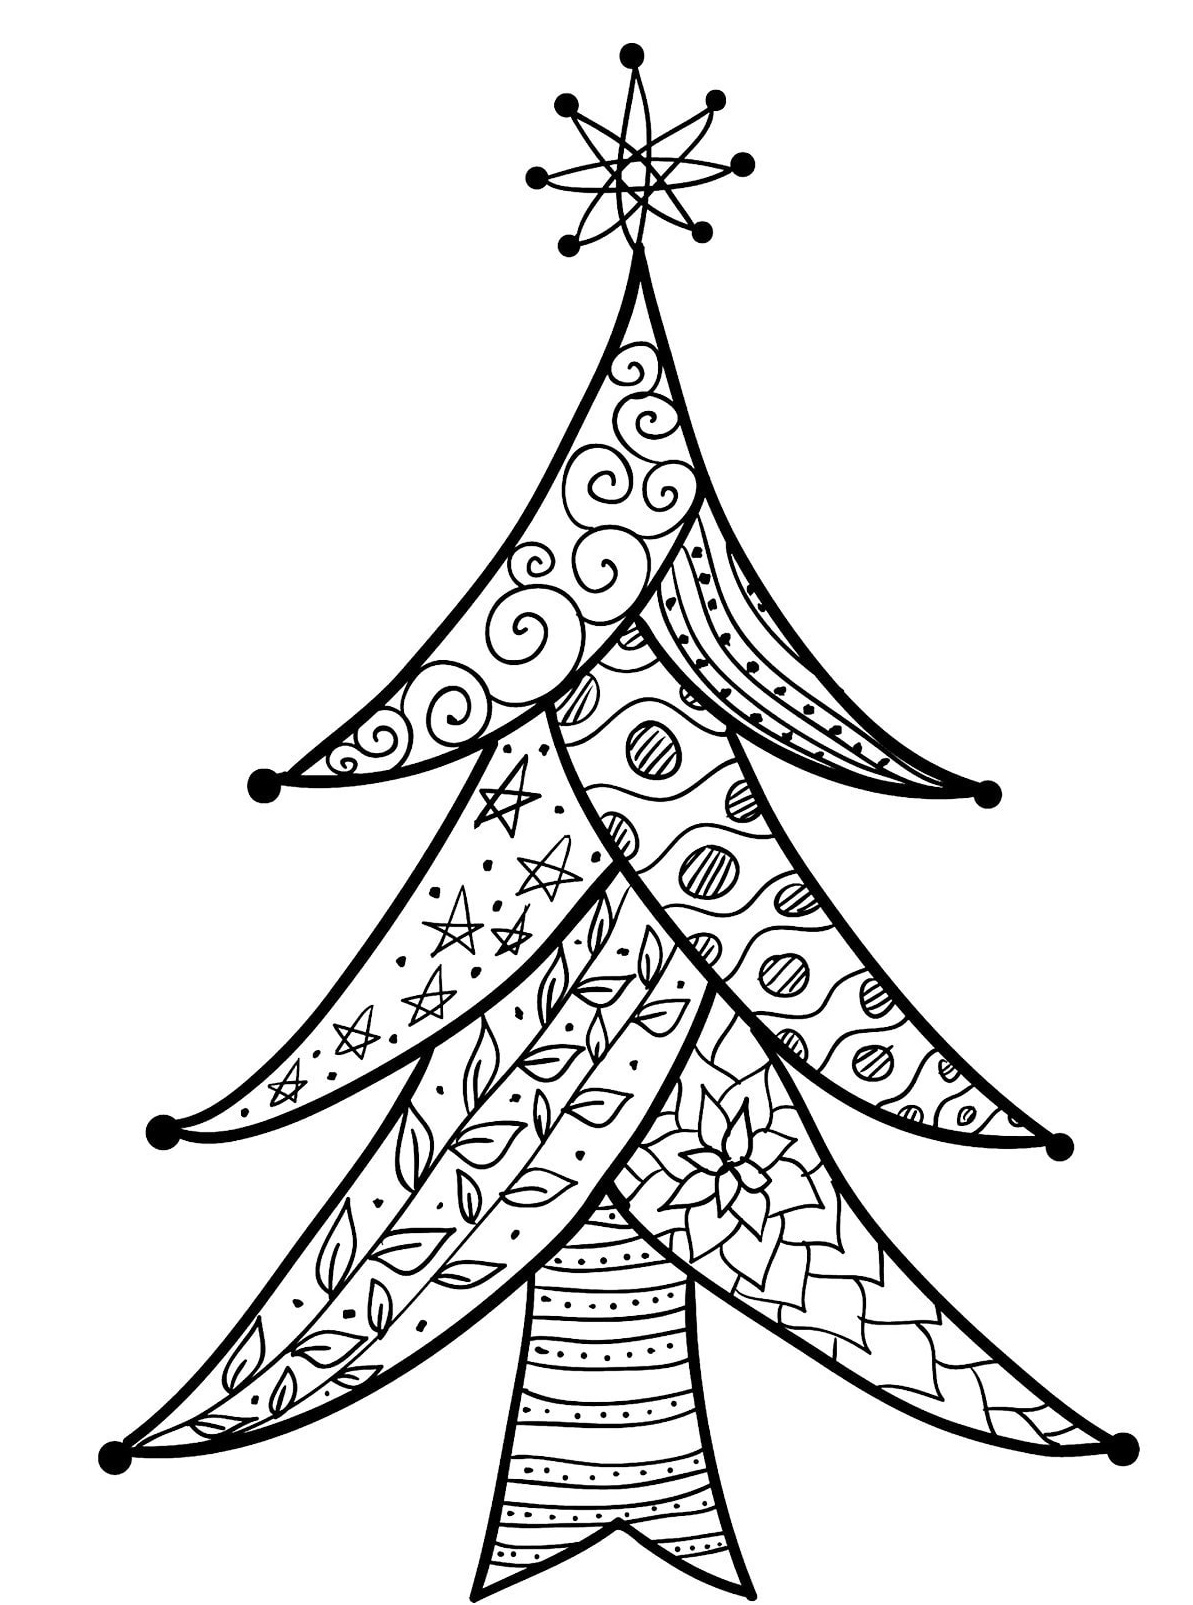 Pretty Patterns On A Christmas Tree Coloring Page